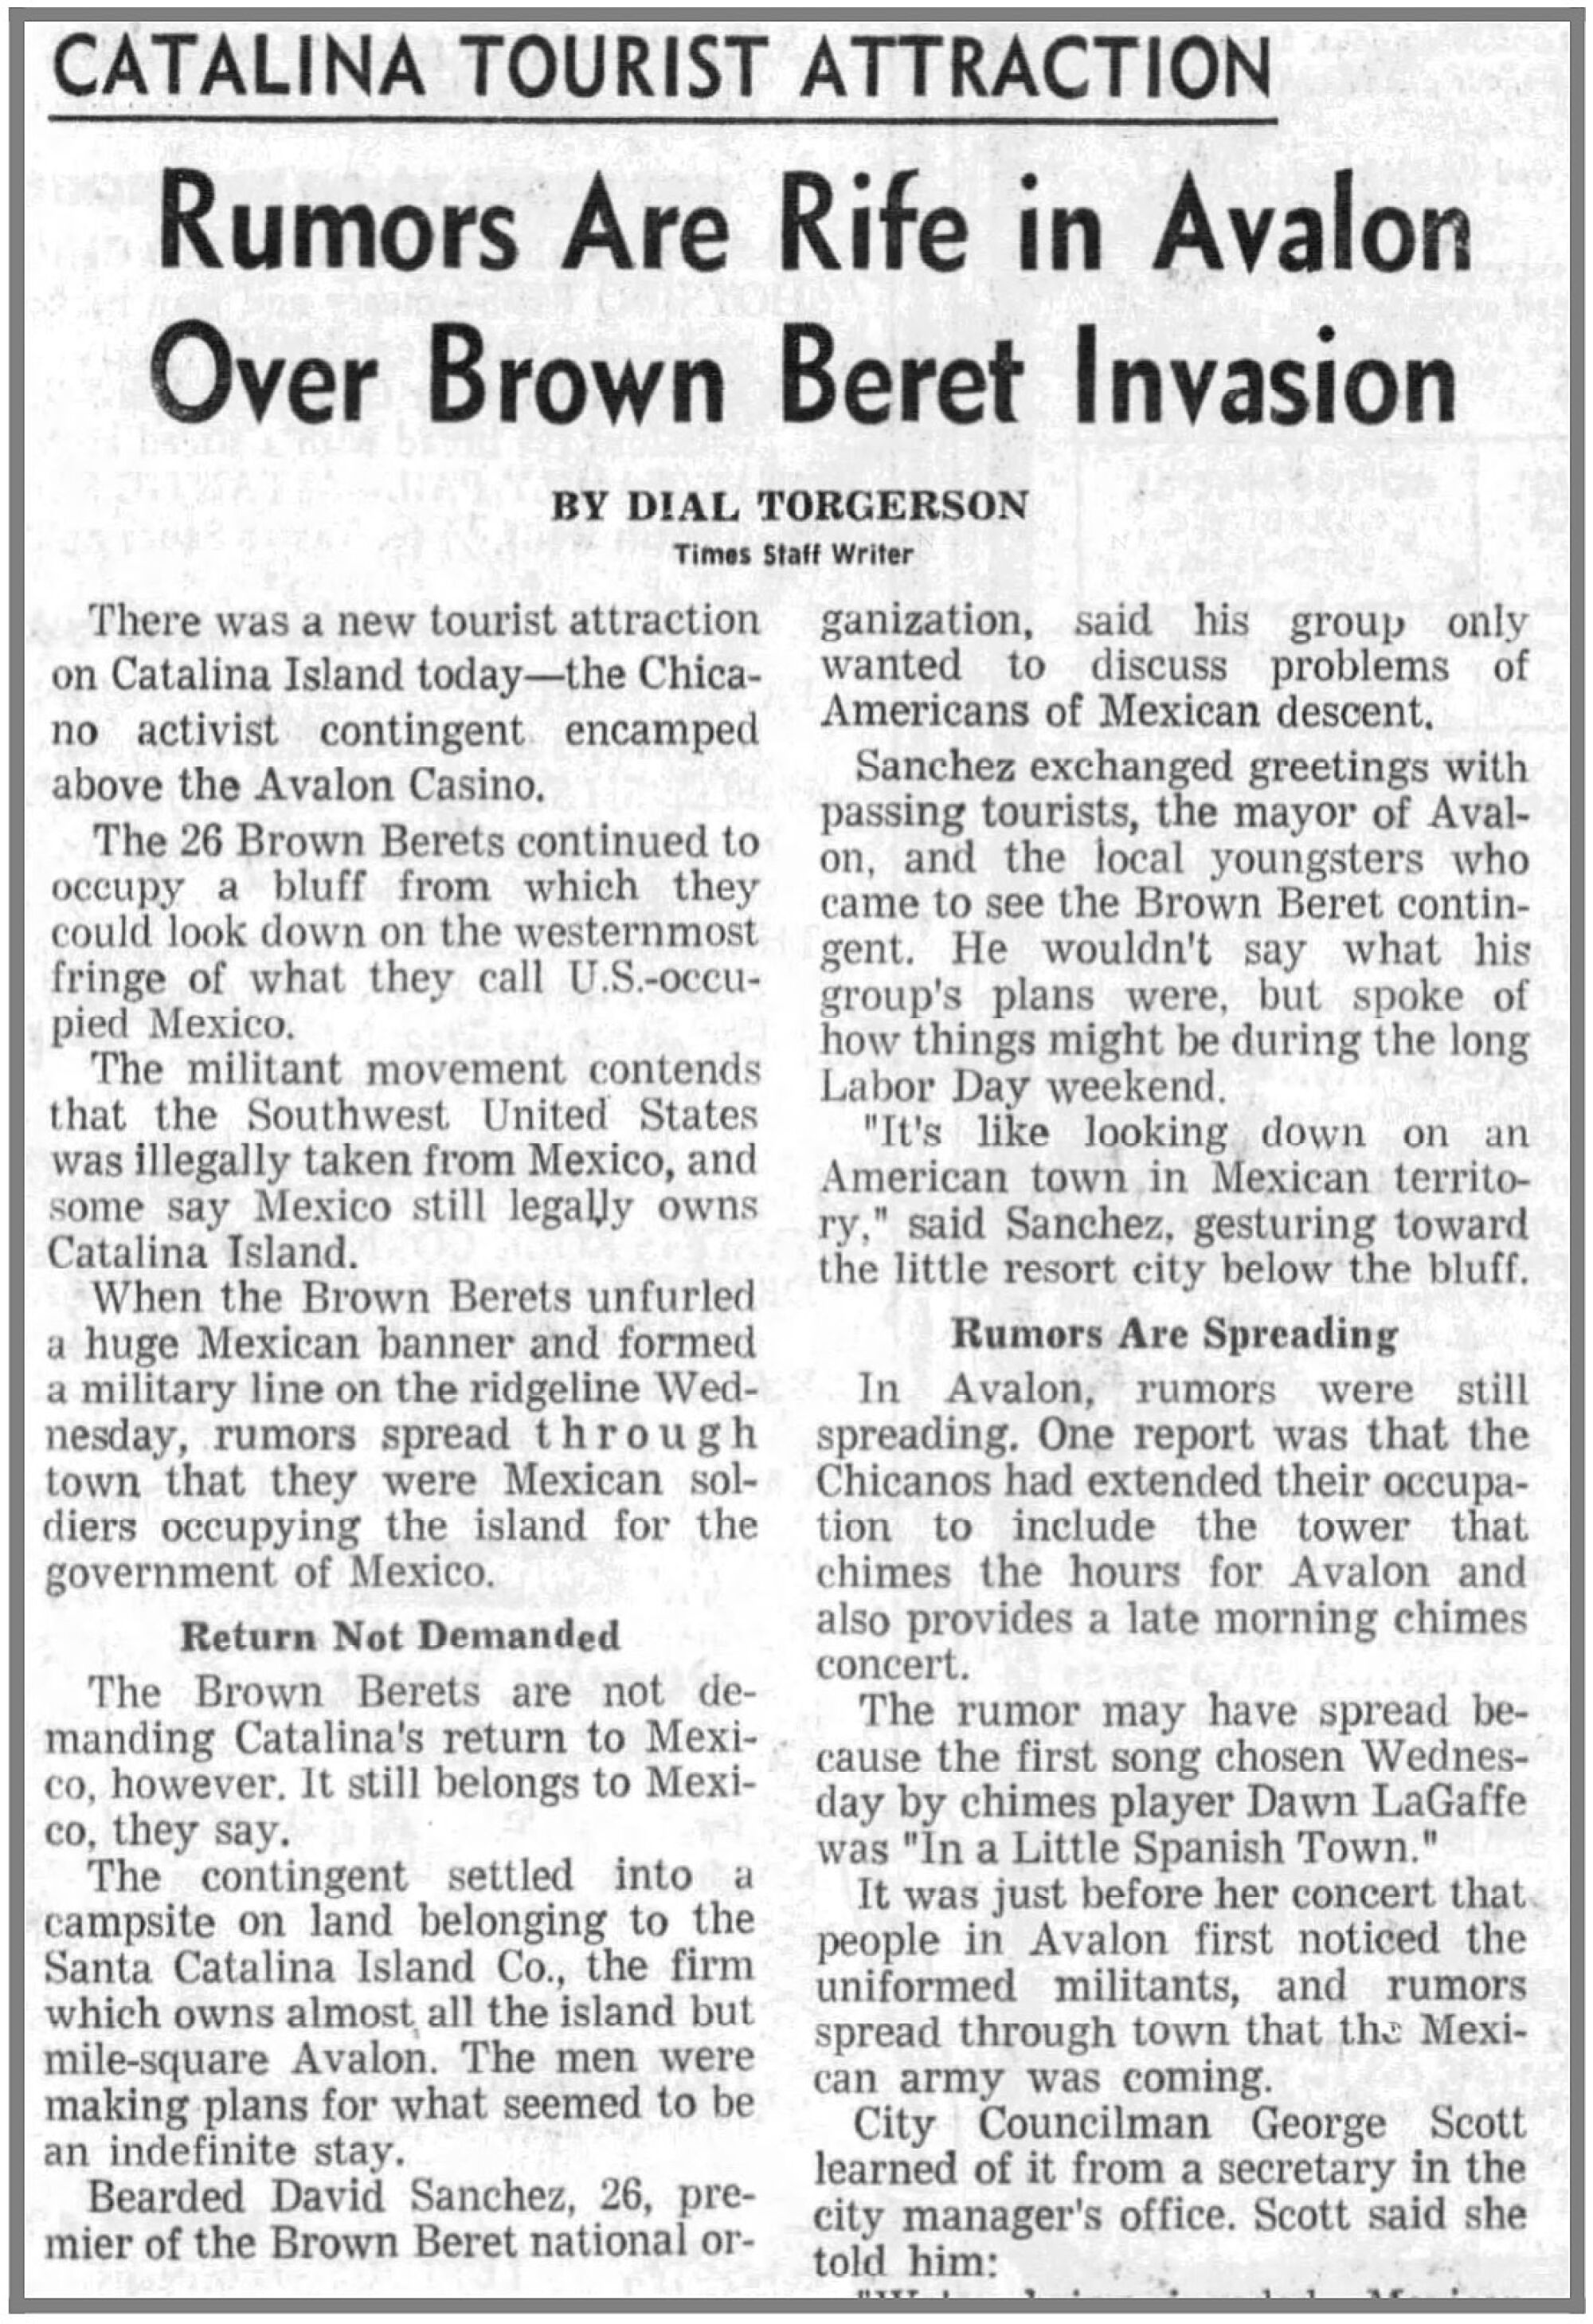 An L.A. Times article from 1972 headlined "Catalina tourist attraction: Rumors are rife in Avalon over Brown Beret invasion"